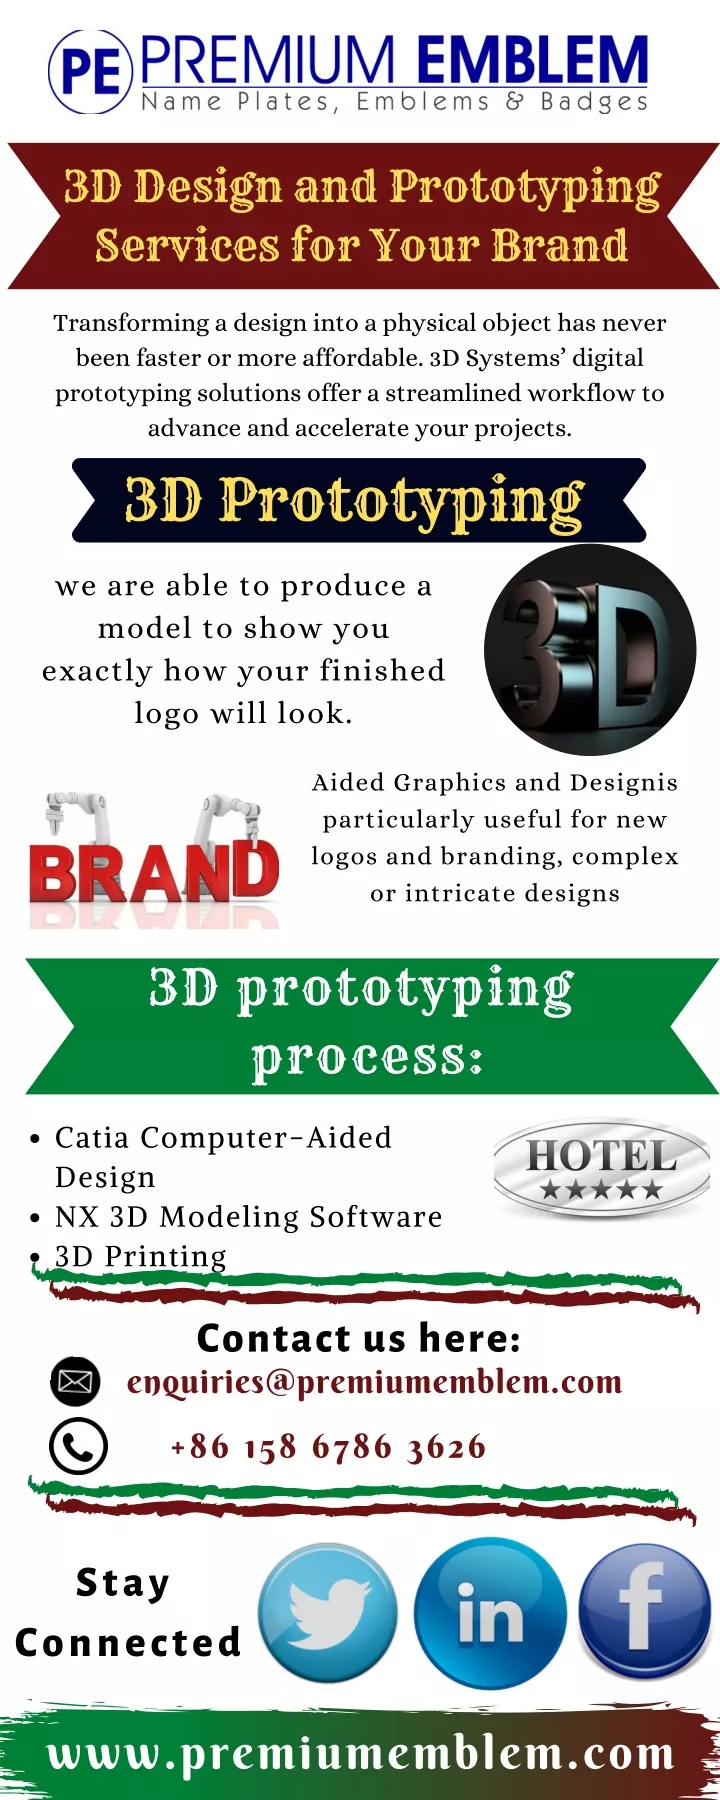 3d design and prototyping services for your brand